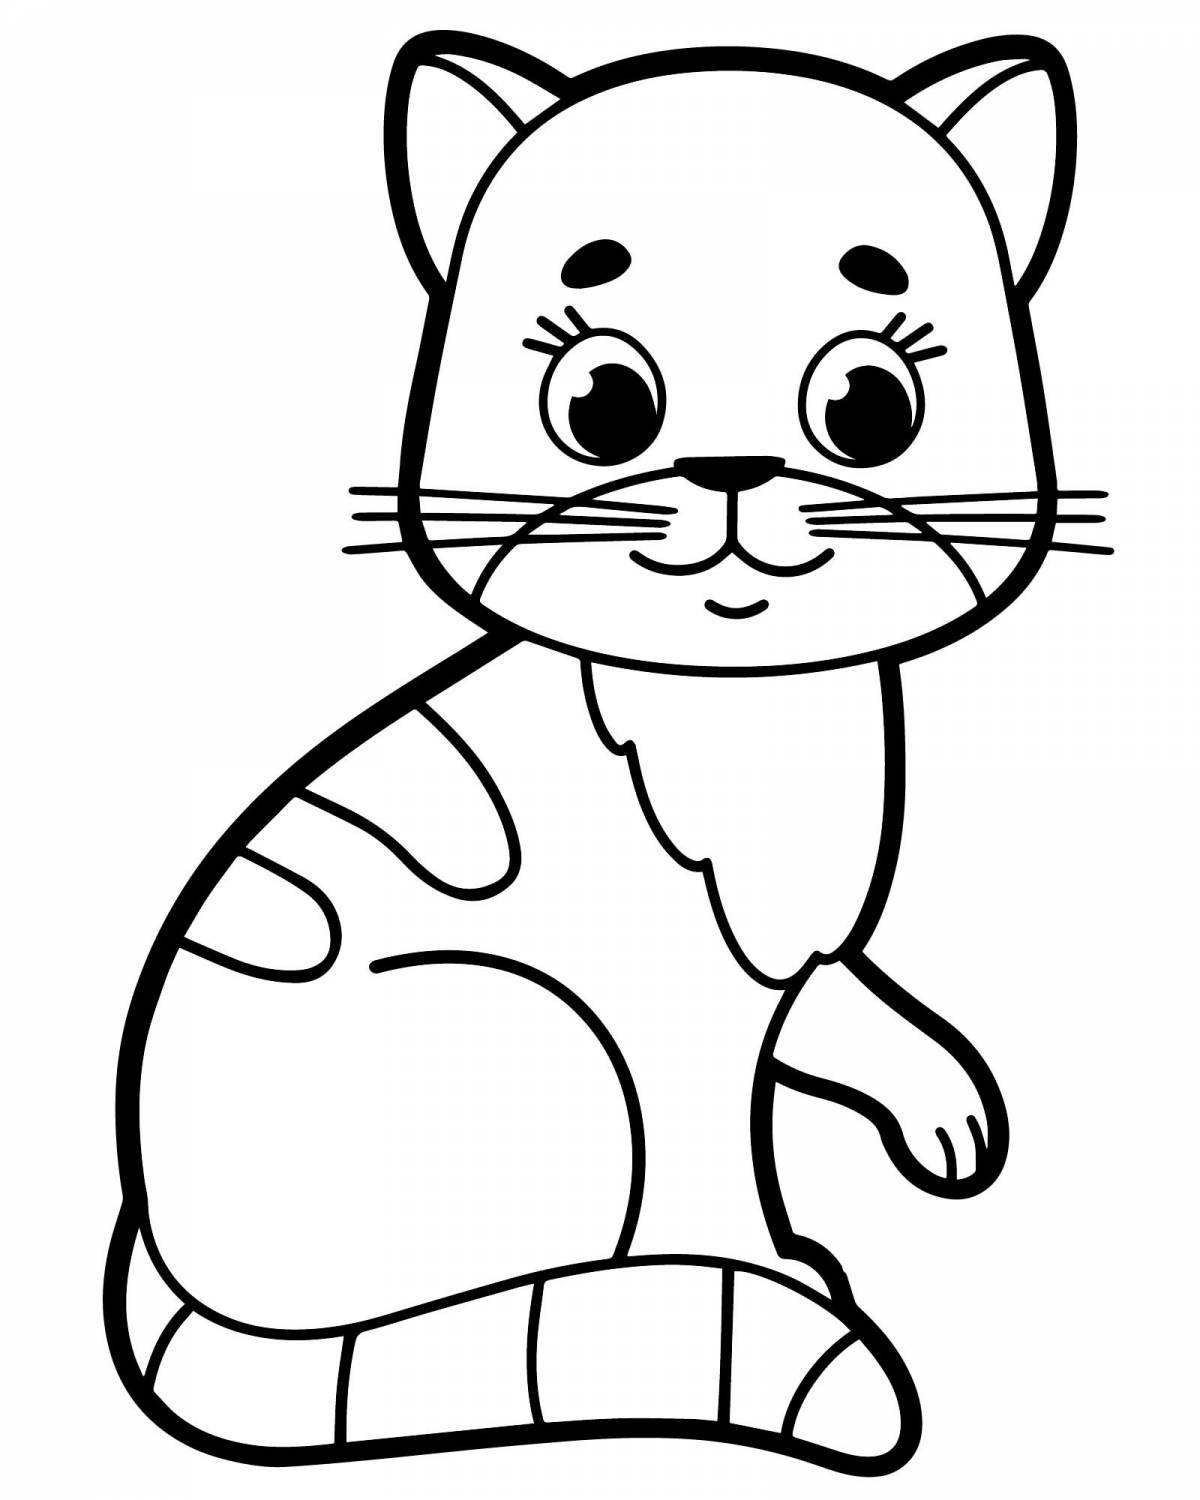 Fluffy cat coloring book for kids